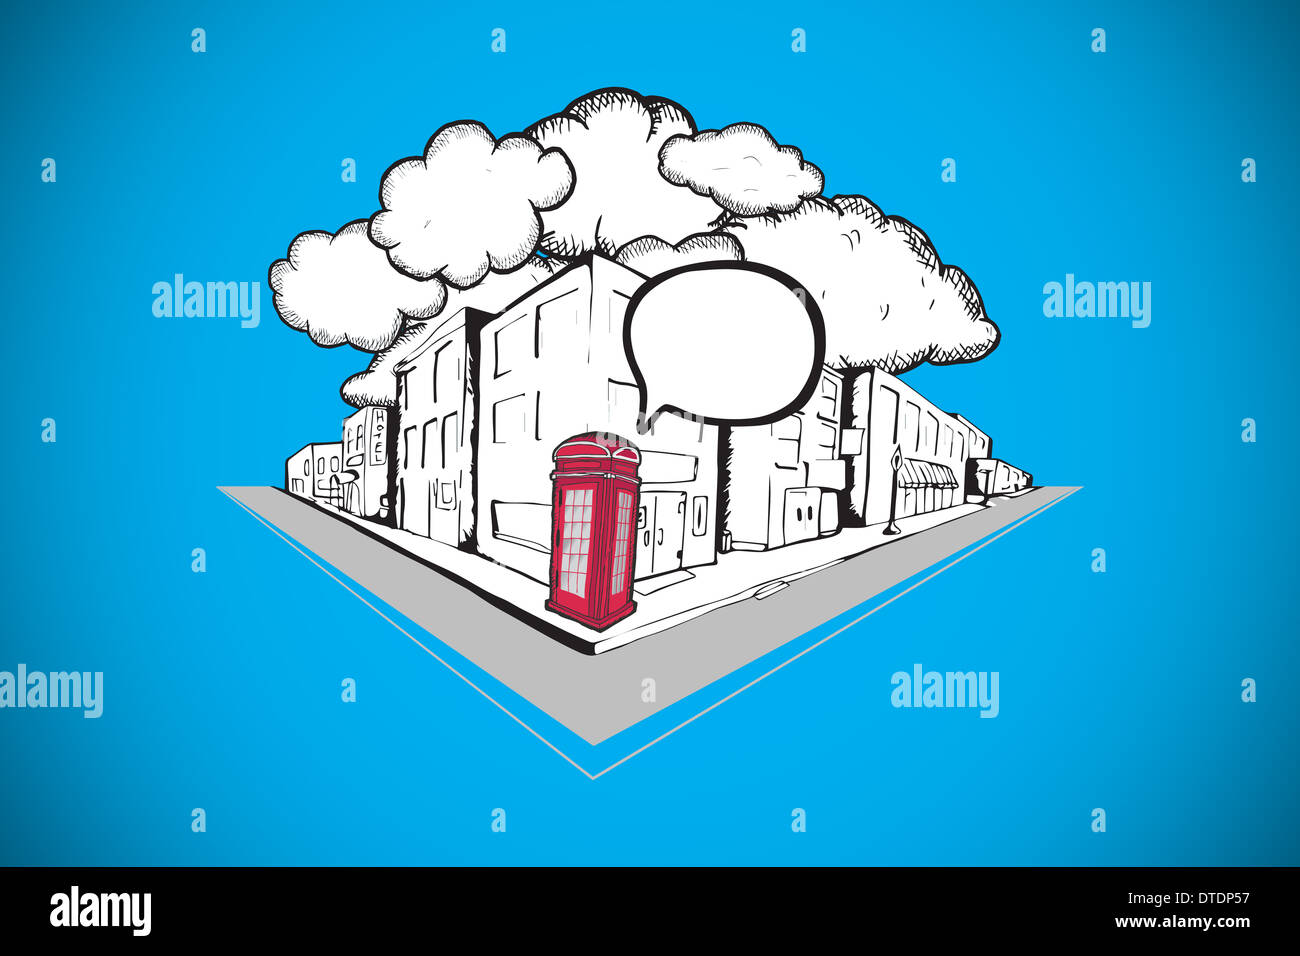 Composite image of phone box with speech bubble on street doodle Stock Photo